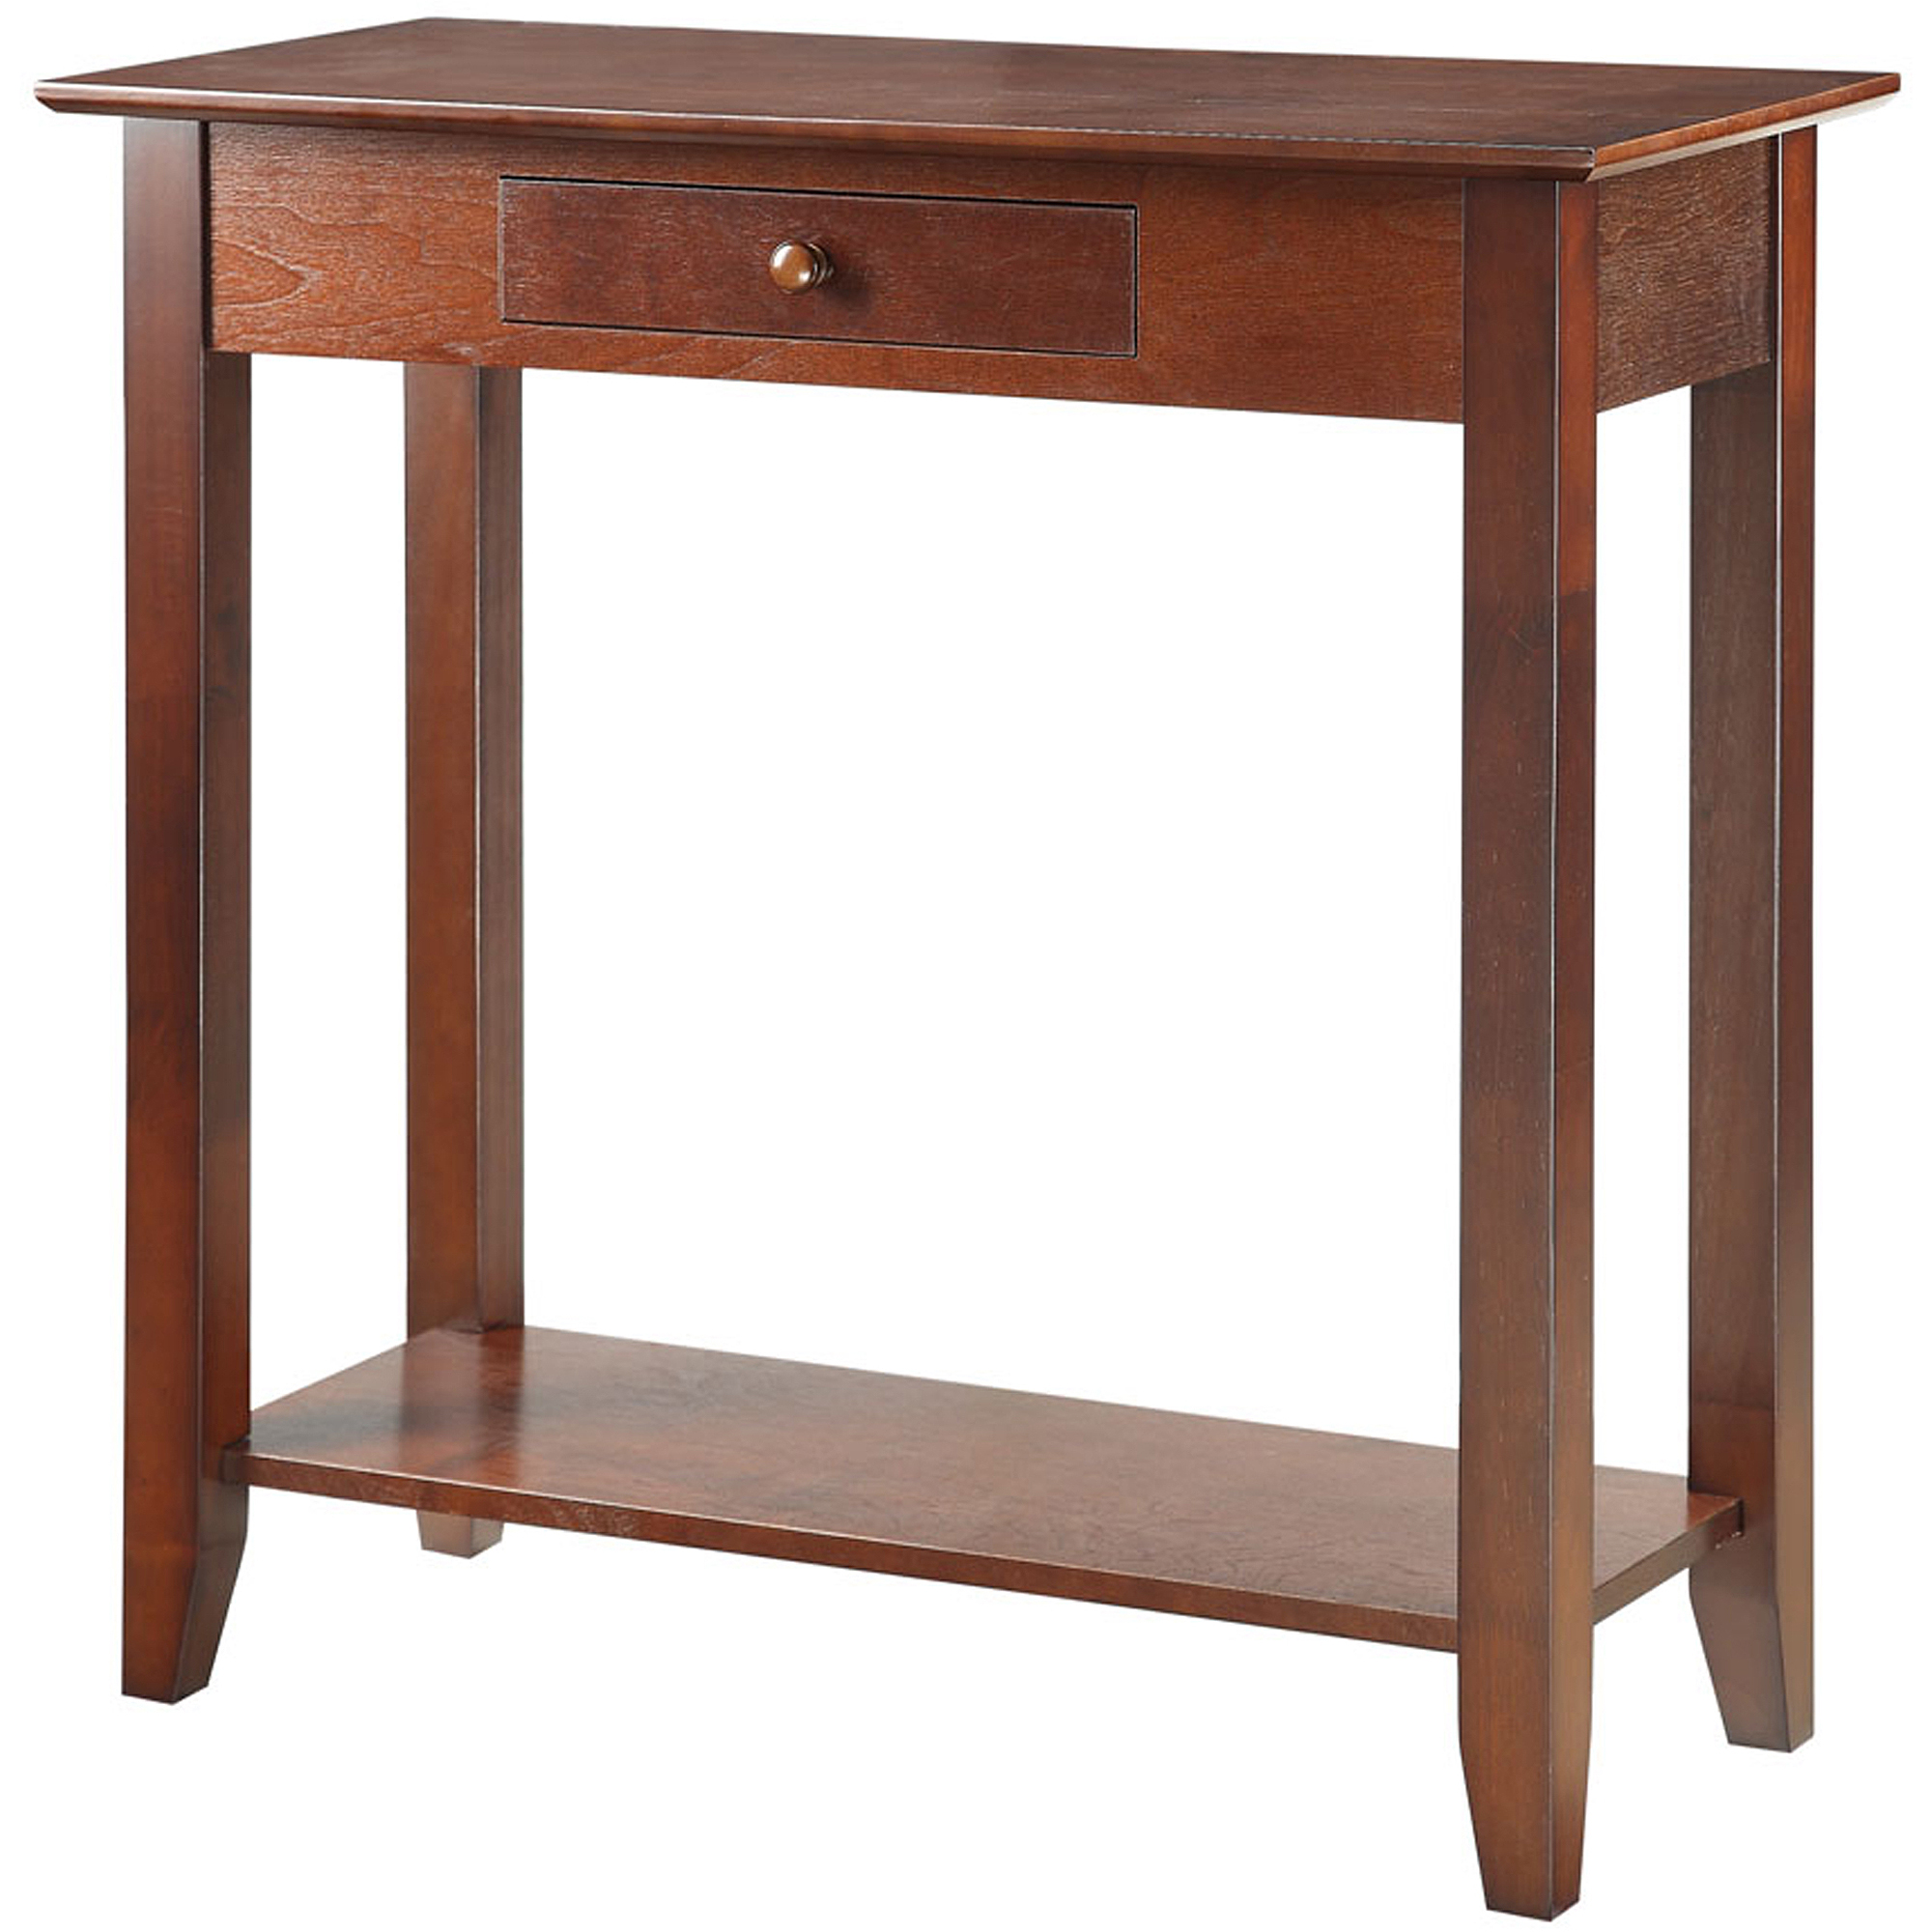 Convenience Concepts American Heritage Hall Table, Multiple Finishes - image 4 of 5